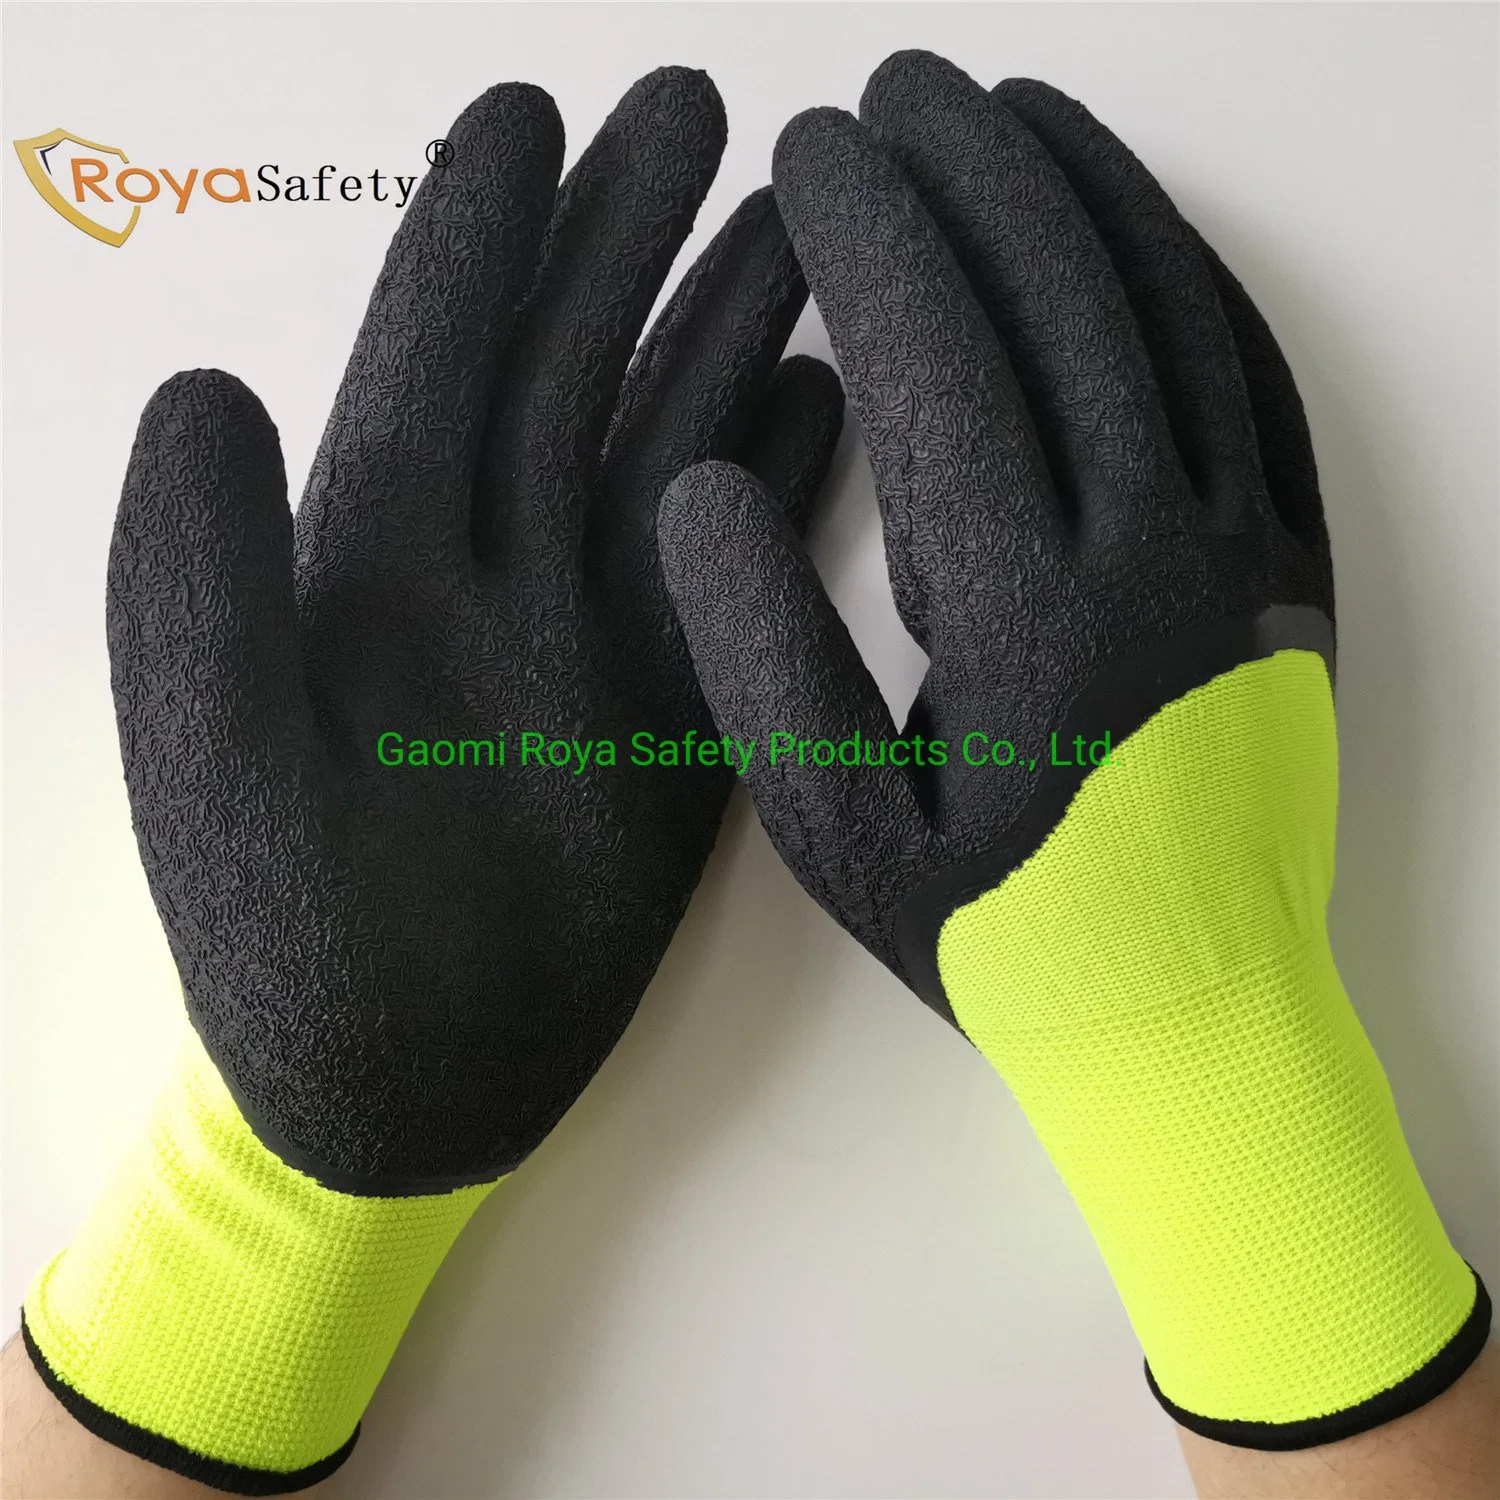 Hardware Tools Work Gloves Protect Hand Safety Working Gloves/Garden Gloves/Safety Gloves